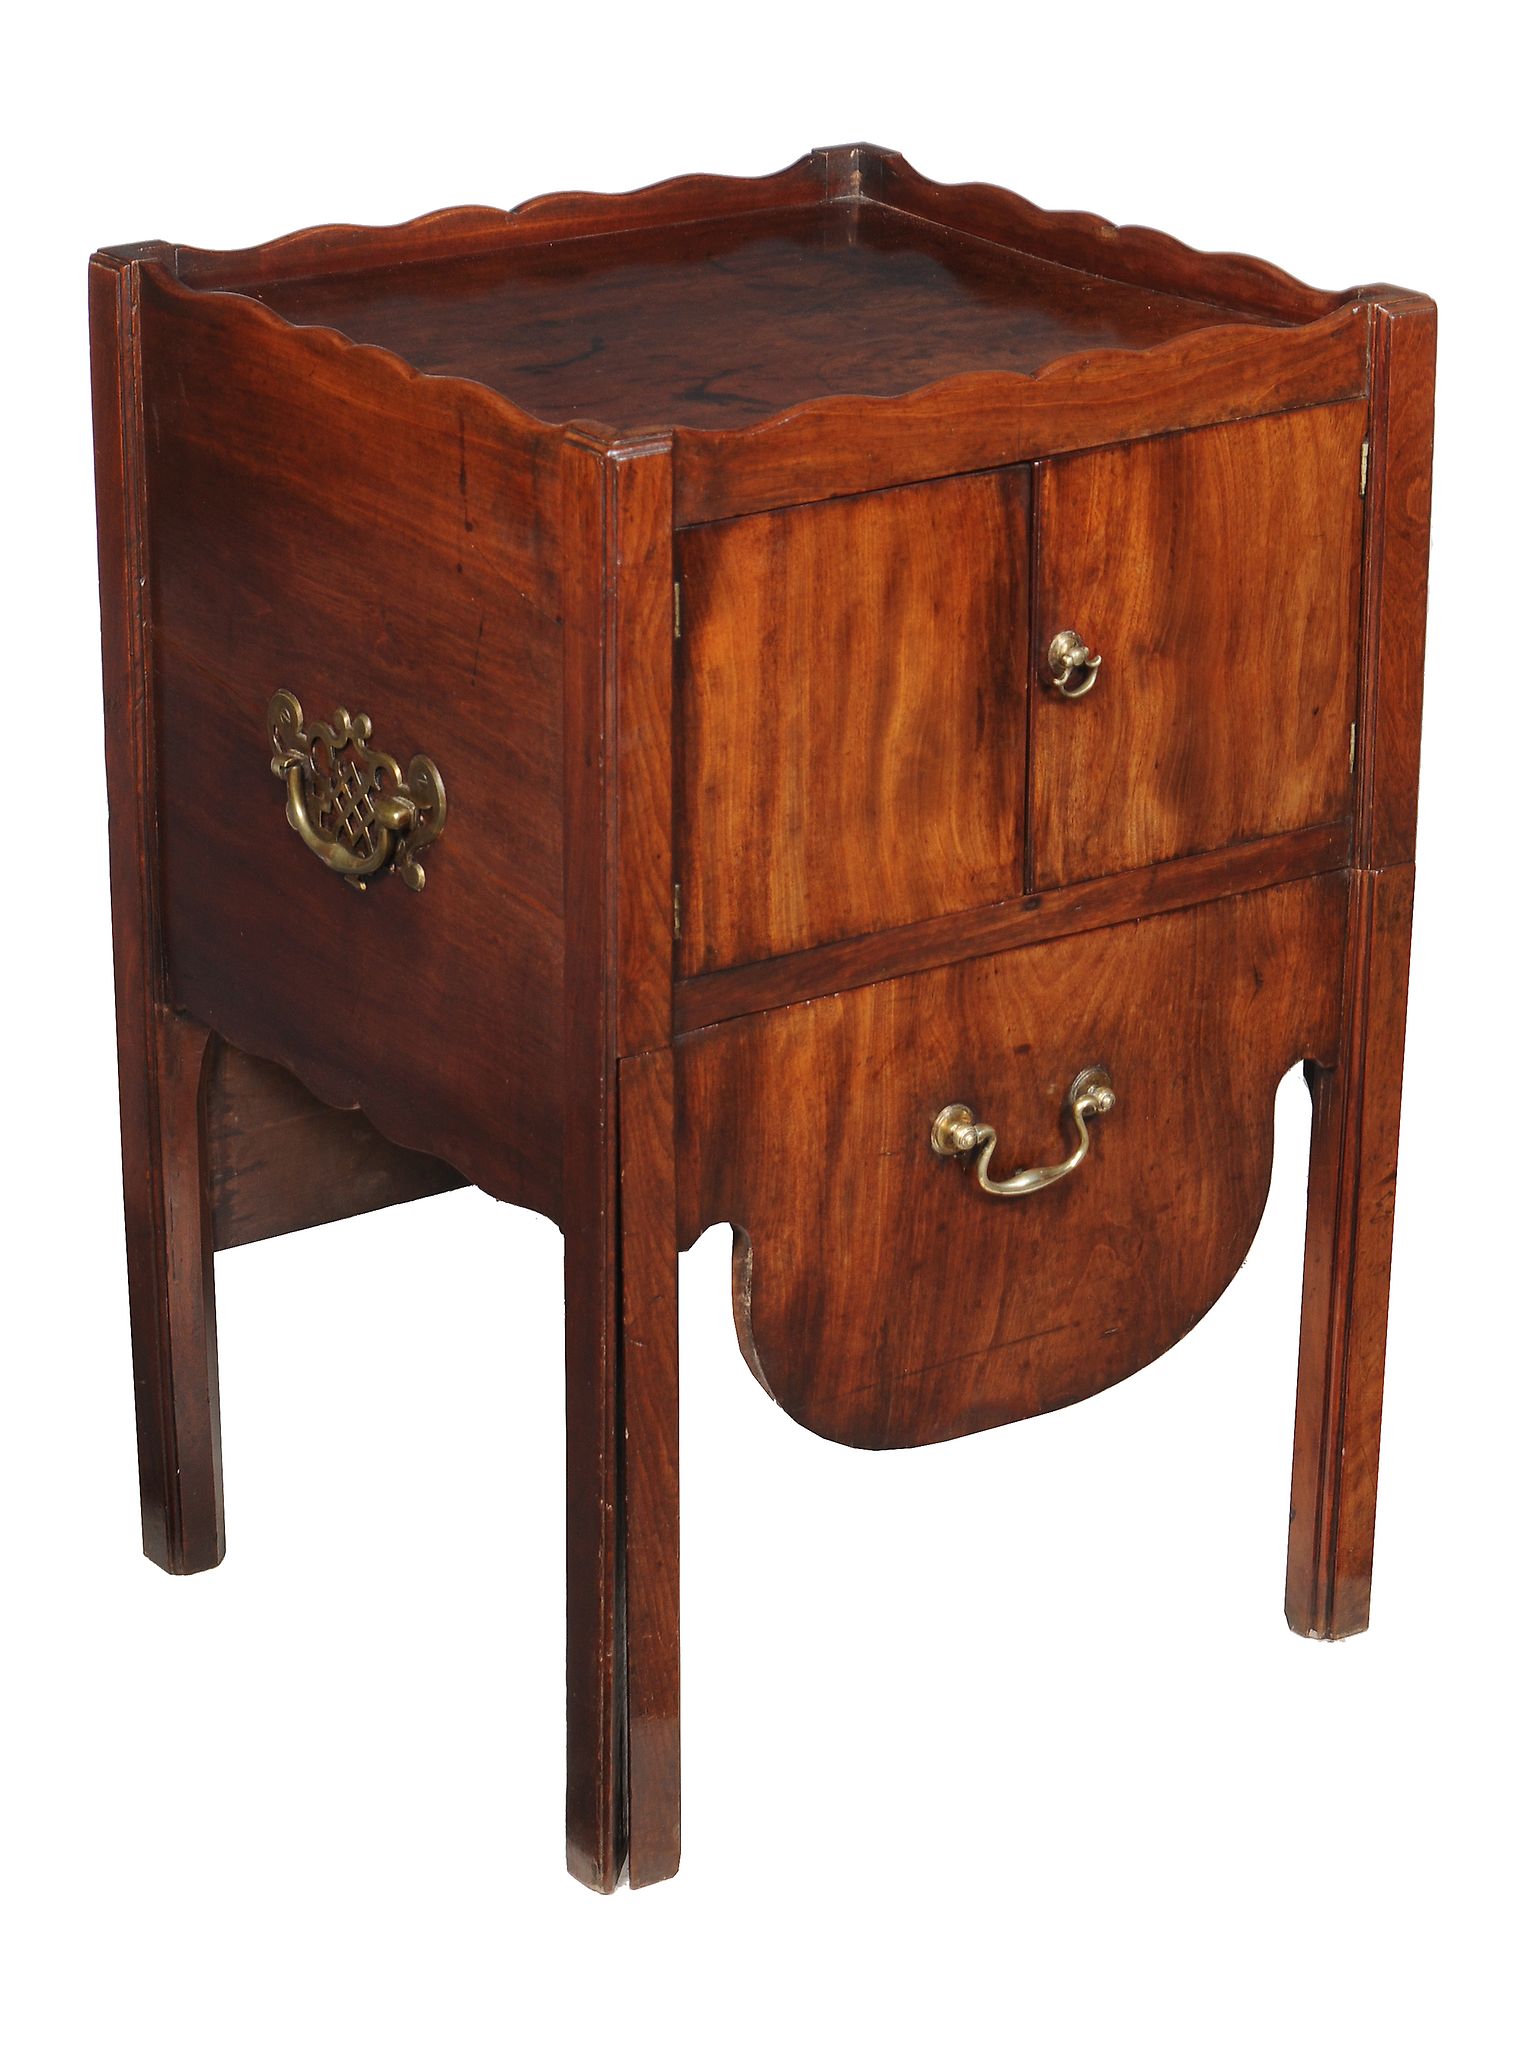 A George III mahogany night commode, circa 1780, with a pair of cupboard doors above the sliding - Image 2 of 3